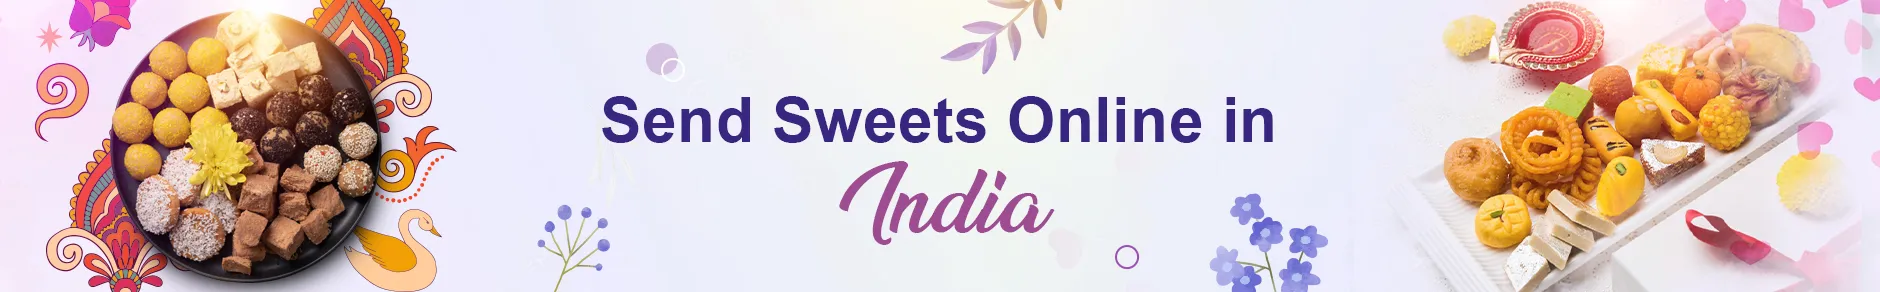 Sweets - Send Sweets to India